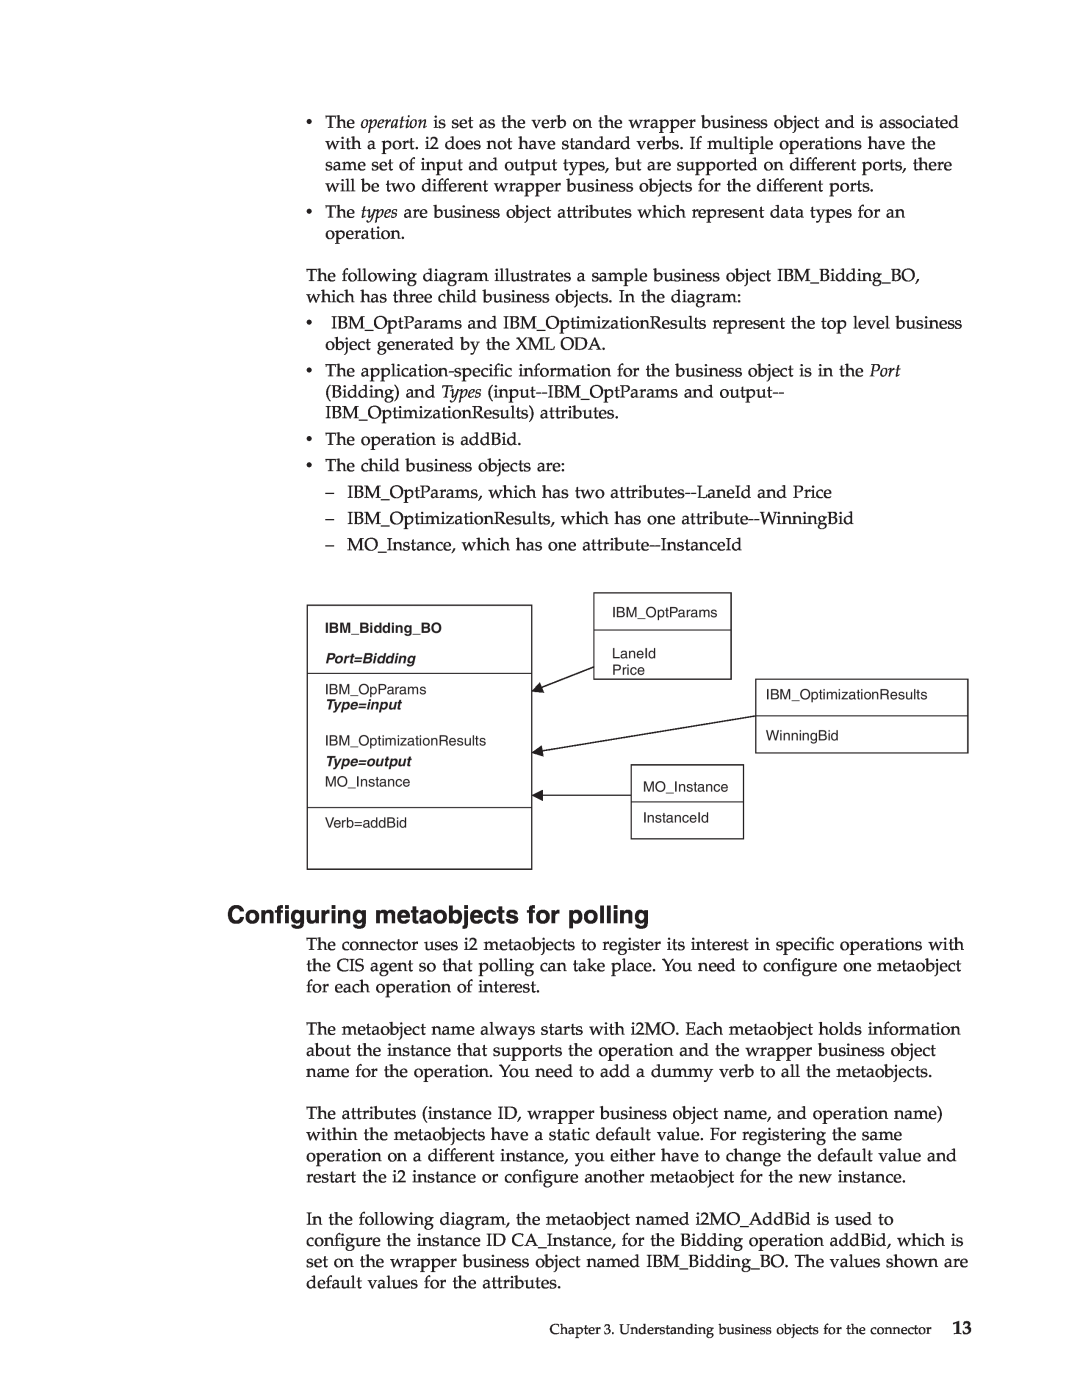 IBM WebSphere Business Integration Adapter manual Configuring metaobjects for polling 